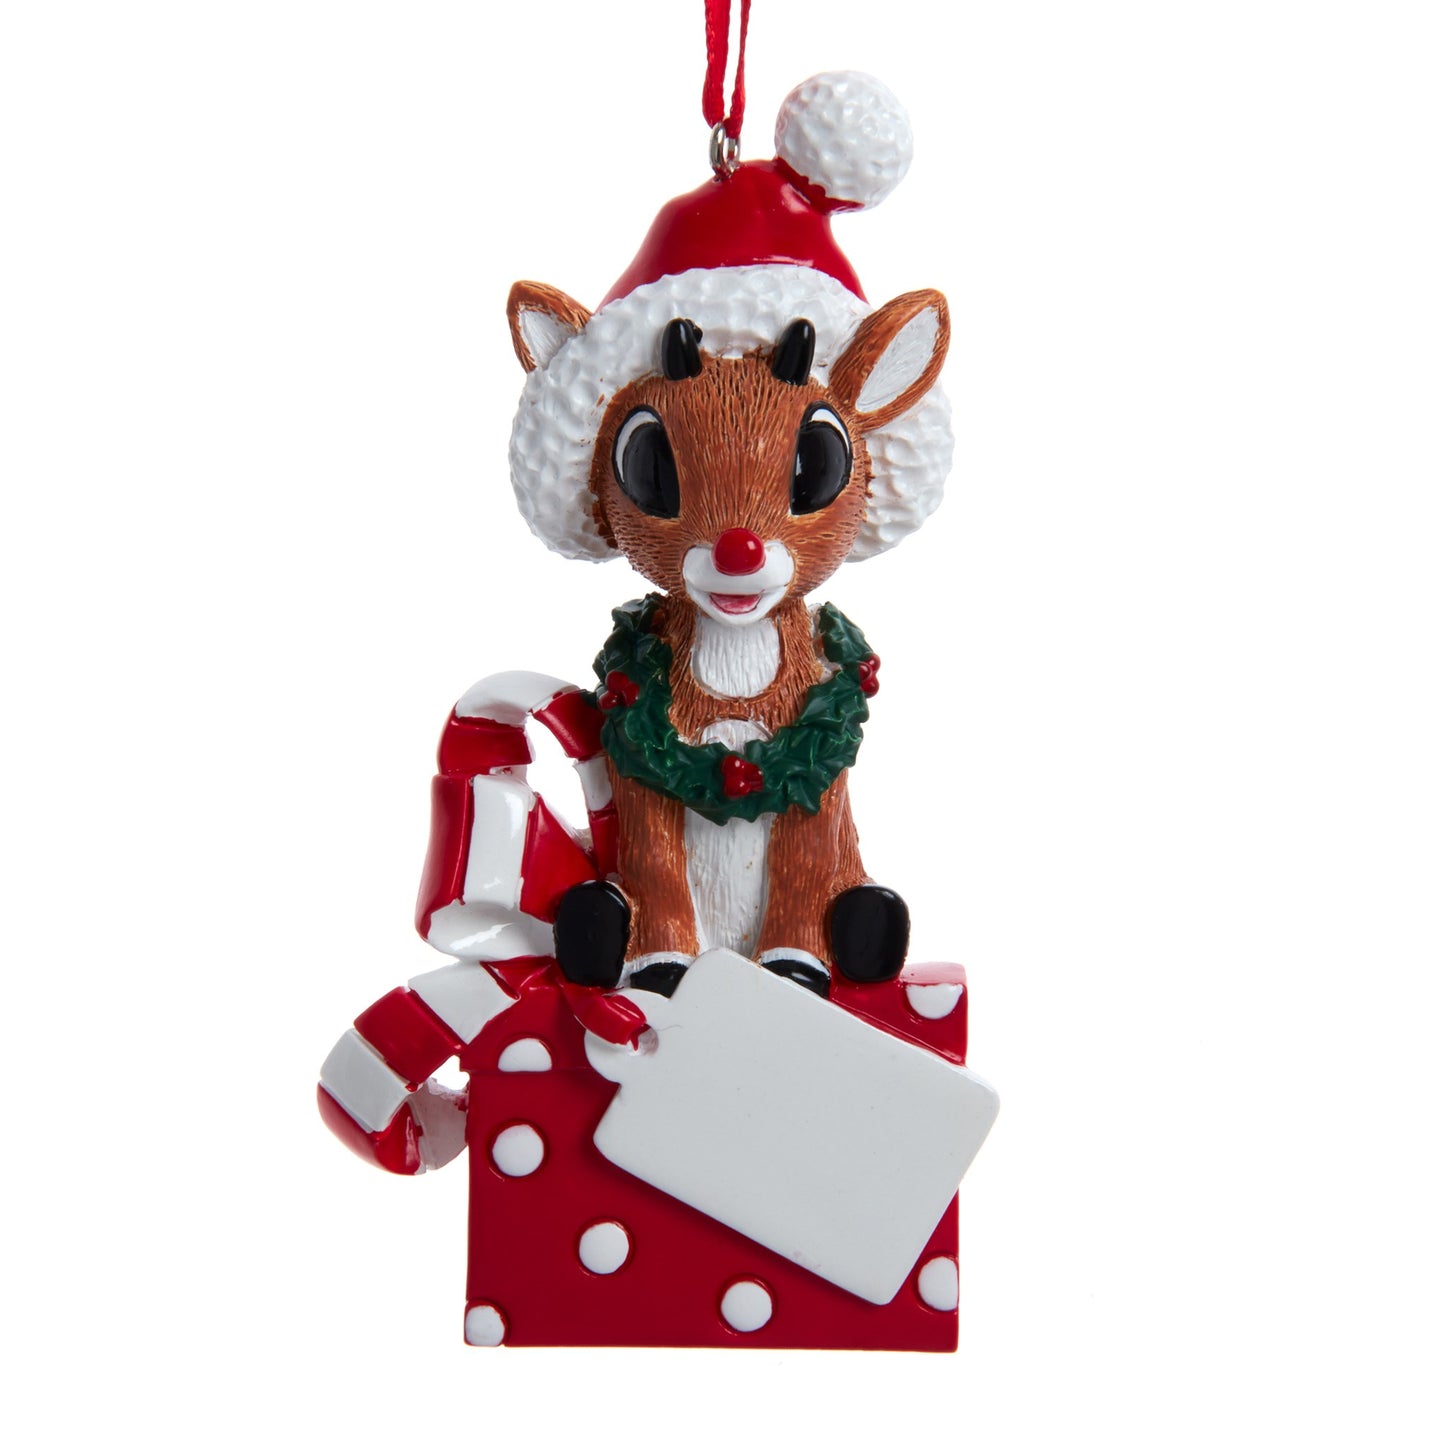 Ornament Personalise Rudolph on Xmas Box 3.5"